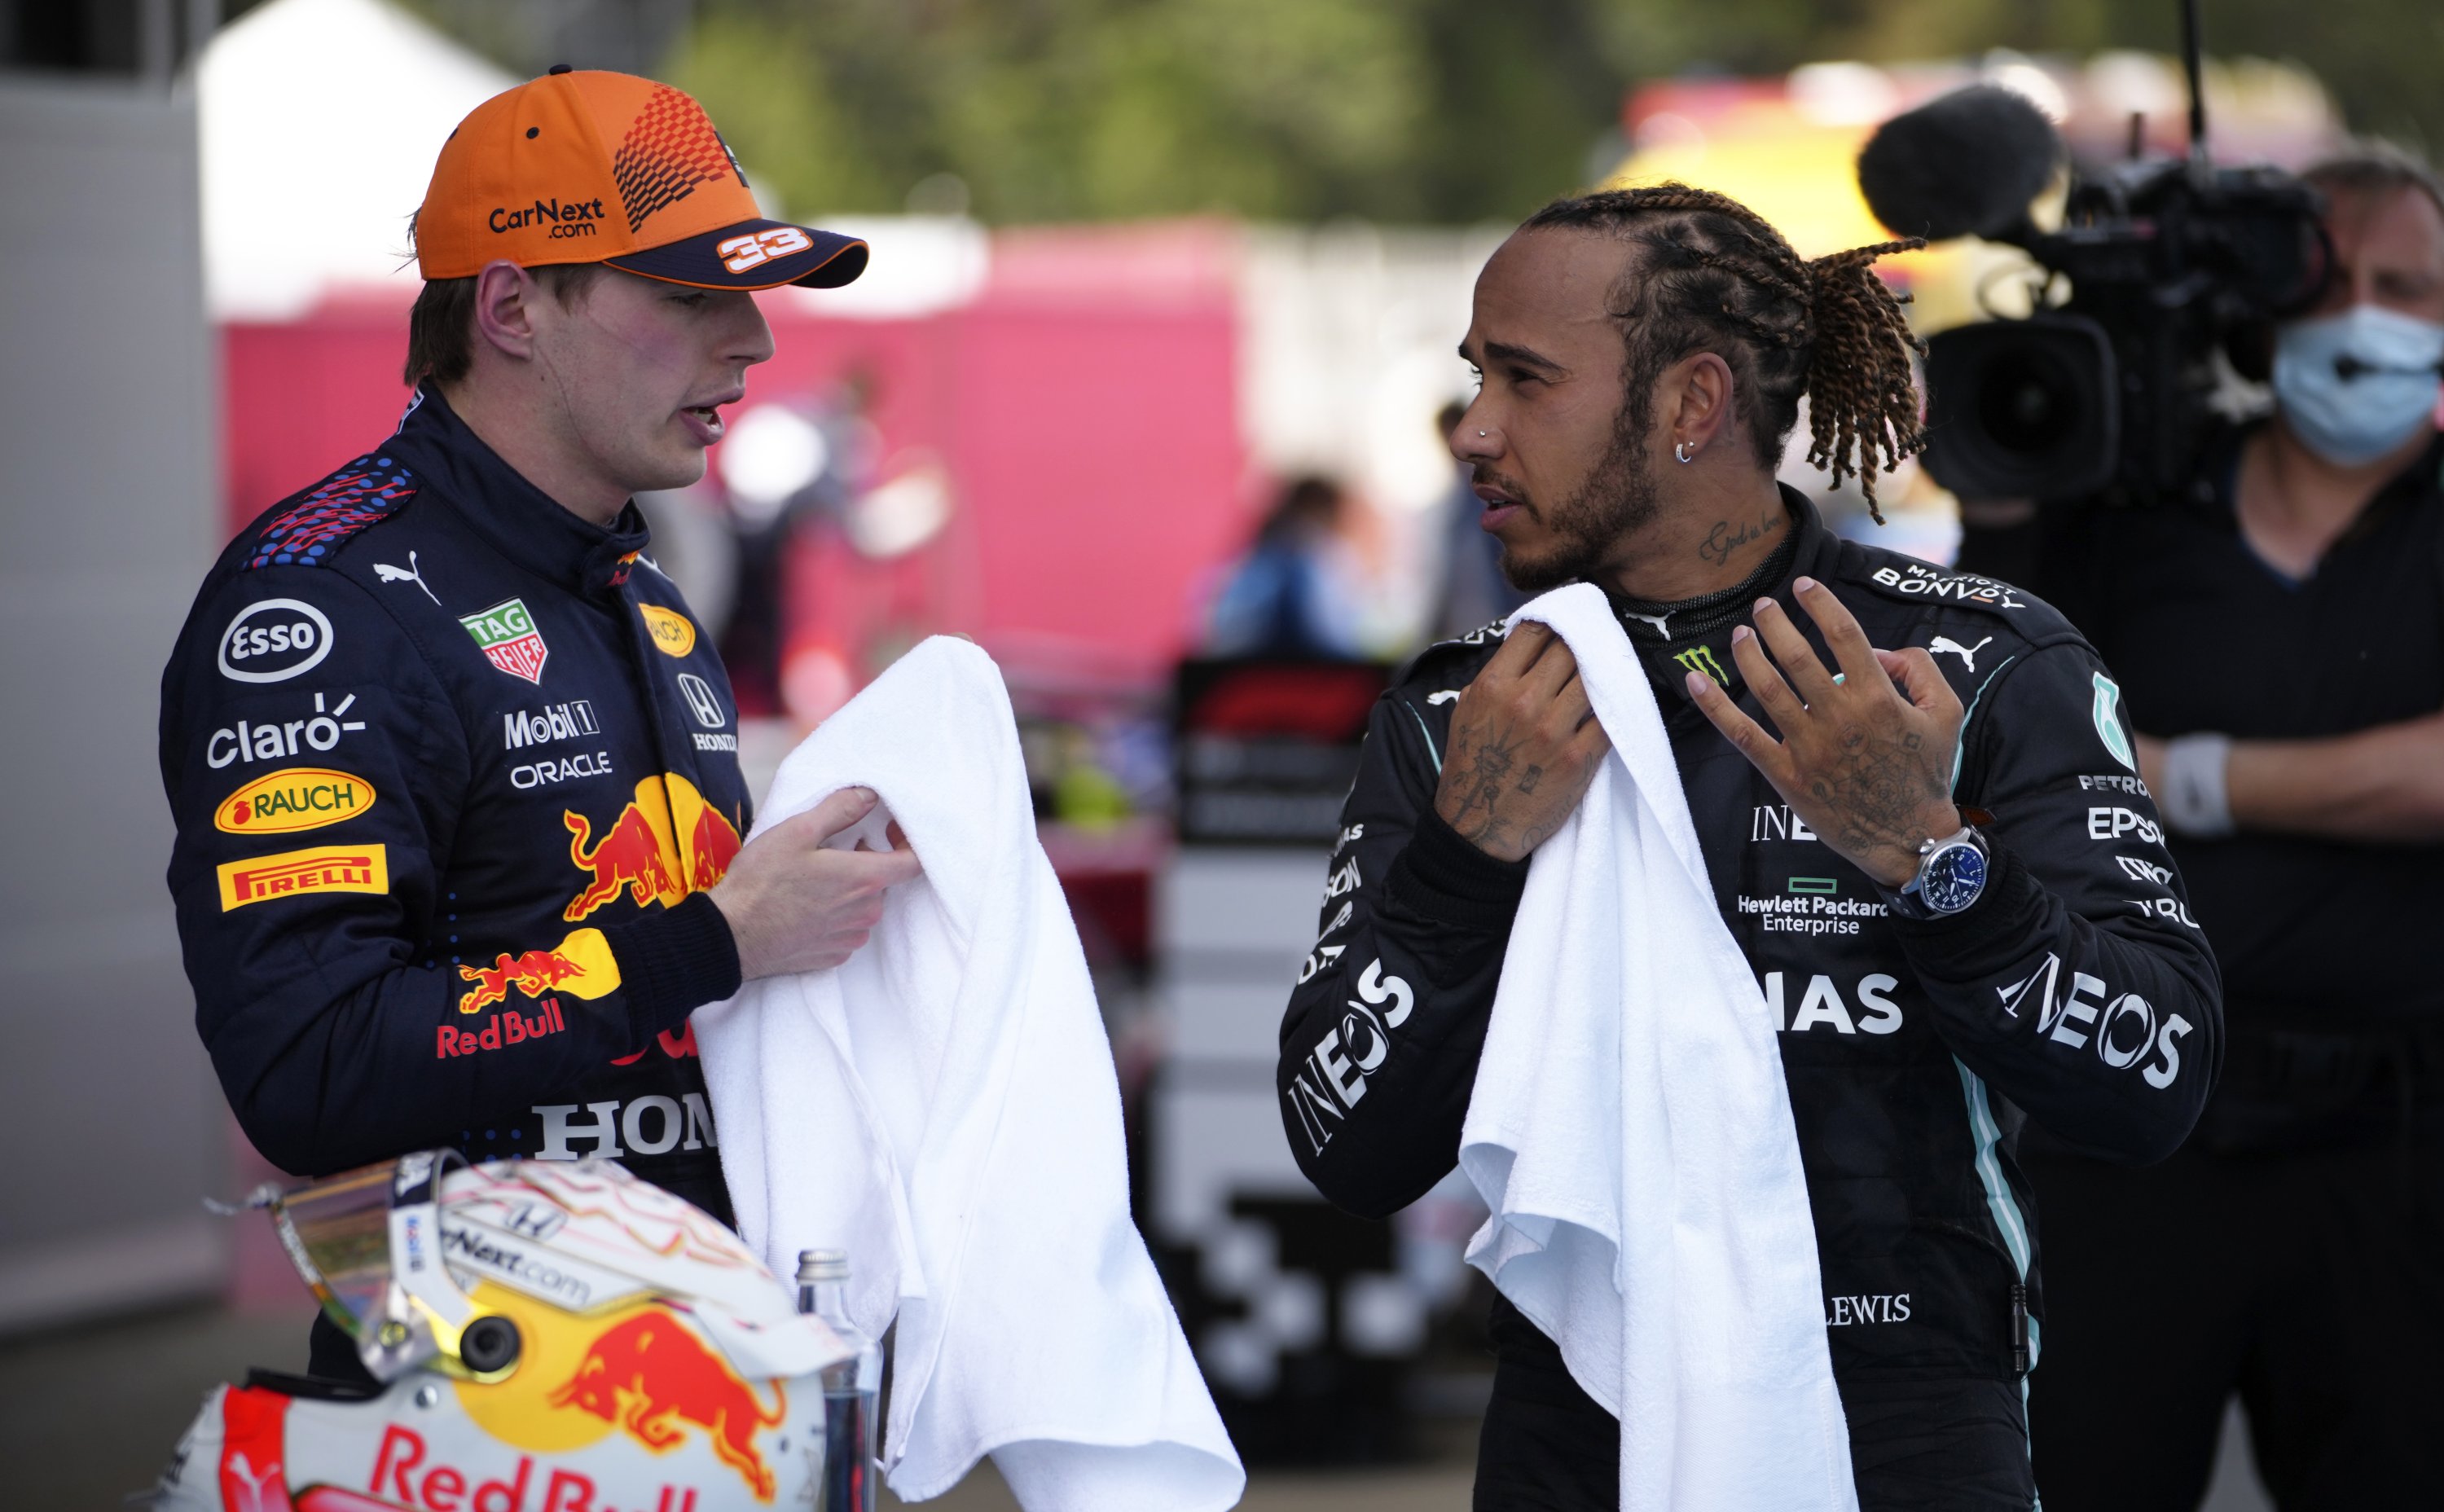 Mercedes driver Lewis Hamilton (R) talks with second placed Red Bull driver Max Verstappen (L), after winning the Spanish Formula One Grand Prix at the Barcelona Catalunya racetrack in Montmelo, Barcelona, Spain, May 9, 2021. (AP Photo)